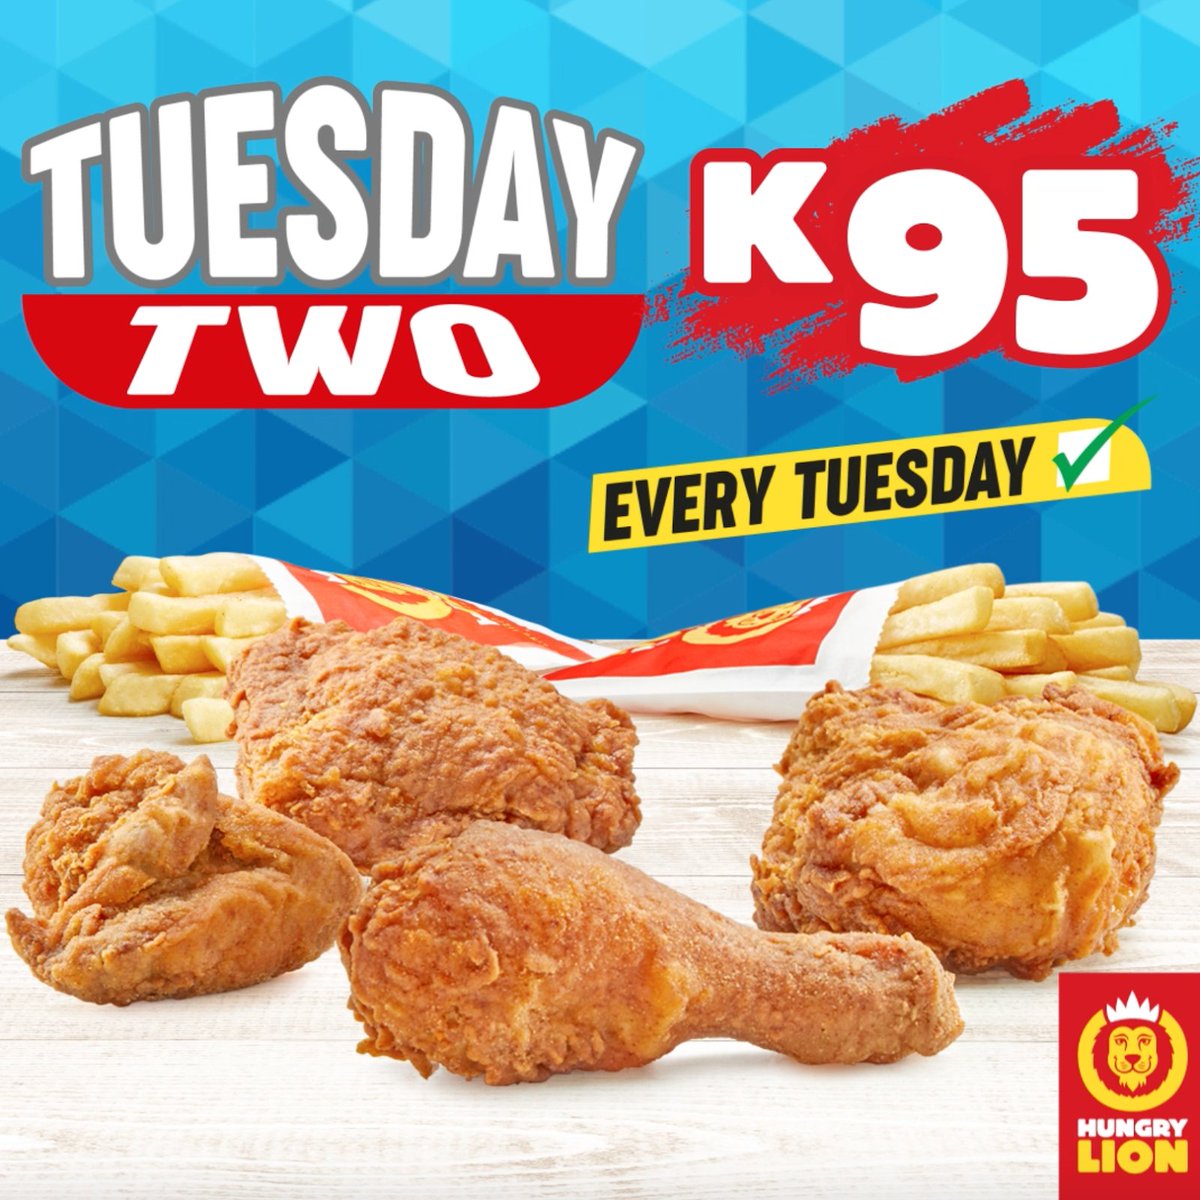 🍗🌮 Craving a delicious midweek treat? Try the Tuesday Two! Four mouthwatering pieces of our delicious fried chicken, paired with golden fries. Hurry, this unbeatable combo is available on Tuesdays only! 🙌😋 #TuesdayTwo #HungryLikeALion